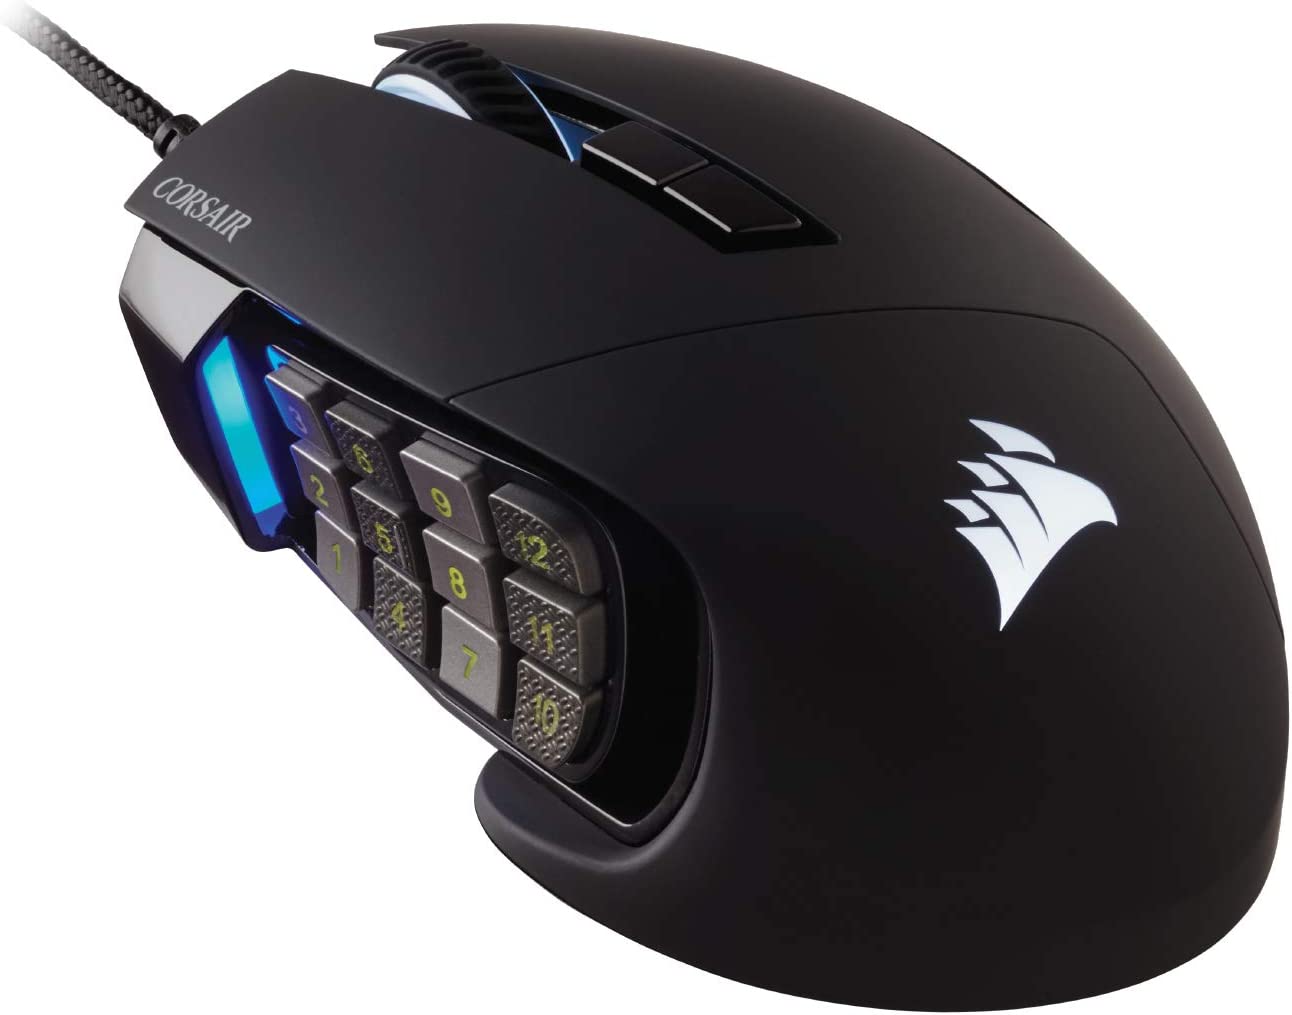 A gaming mouse for MMORPG games should have extra buttons that are programmable and should be customizable through configuration software.